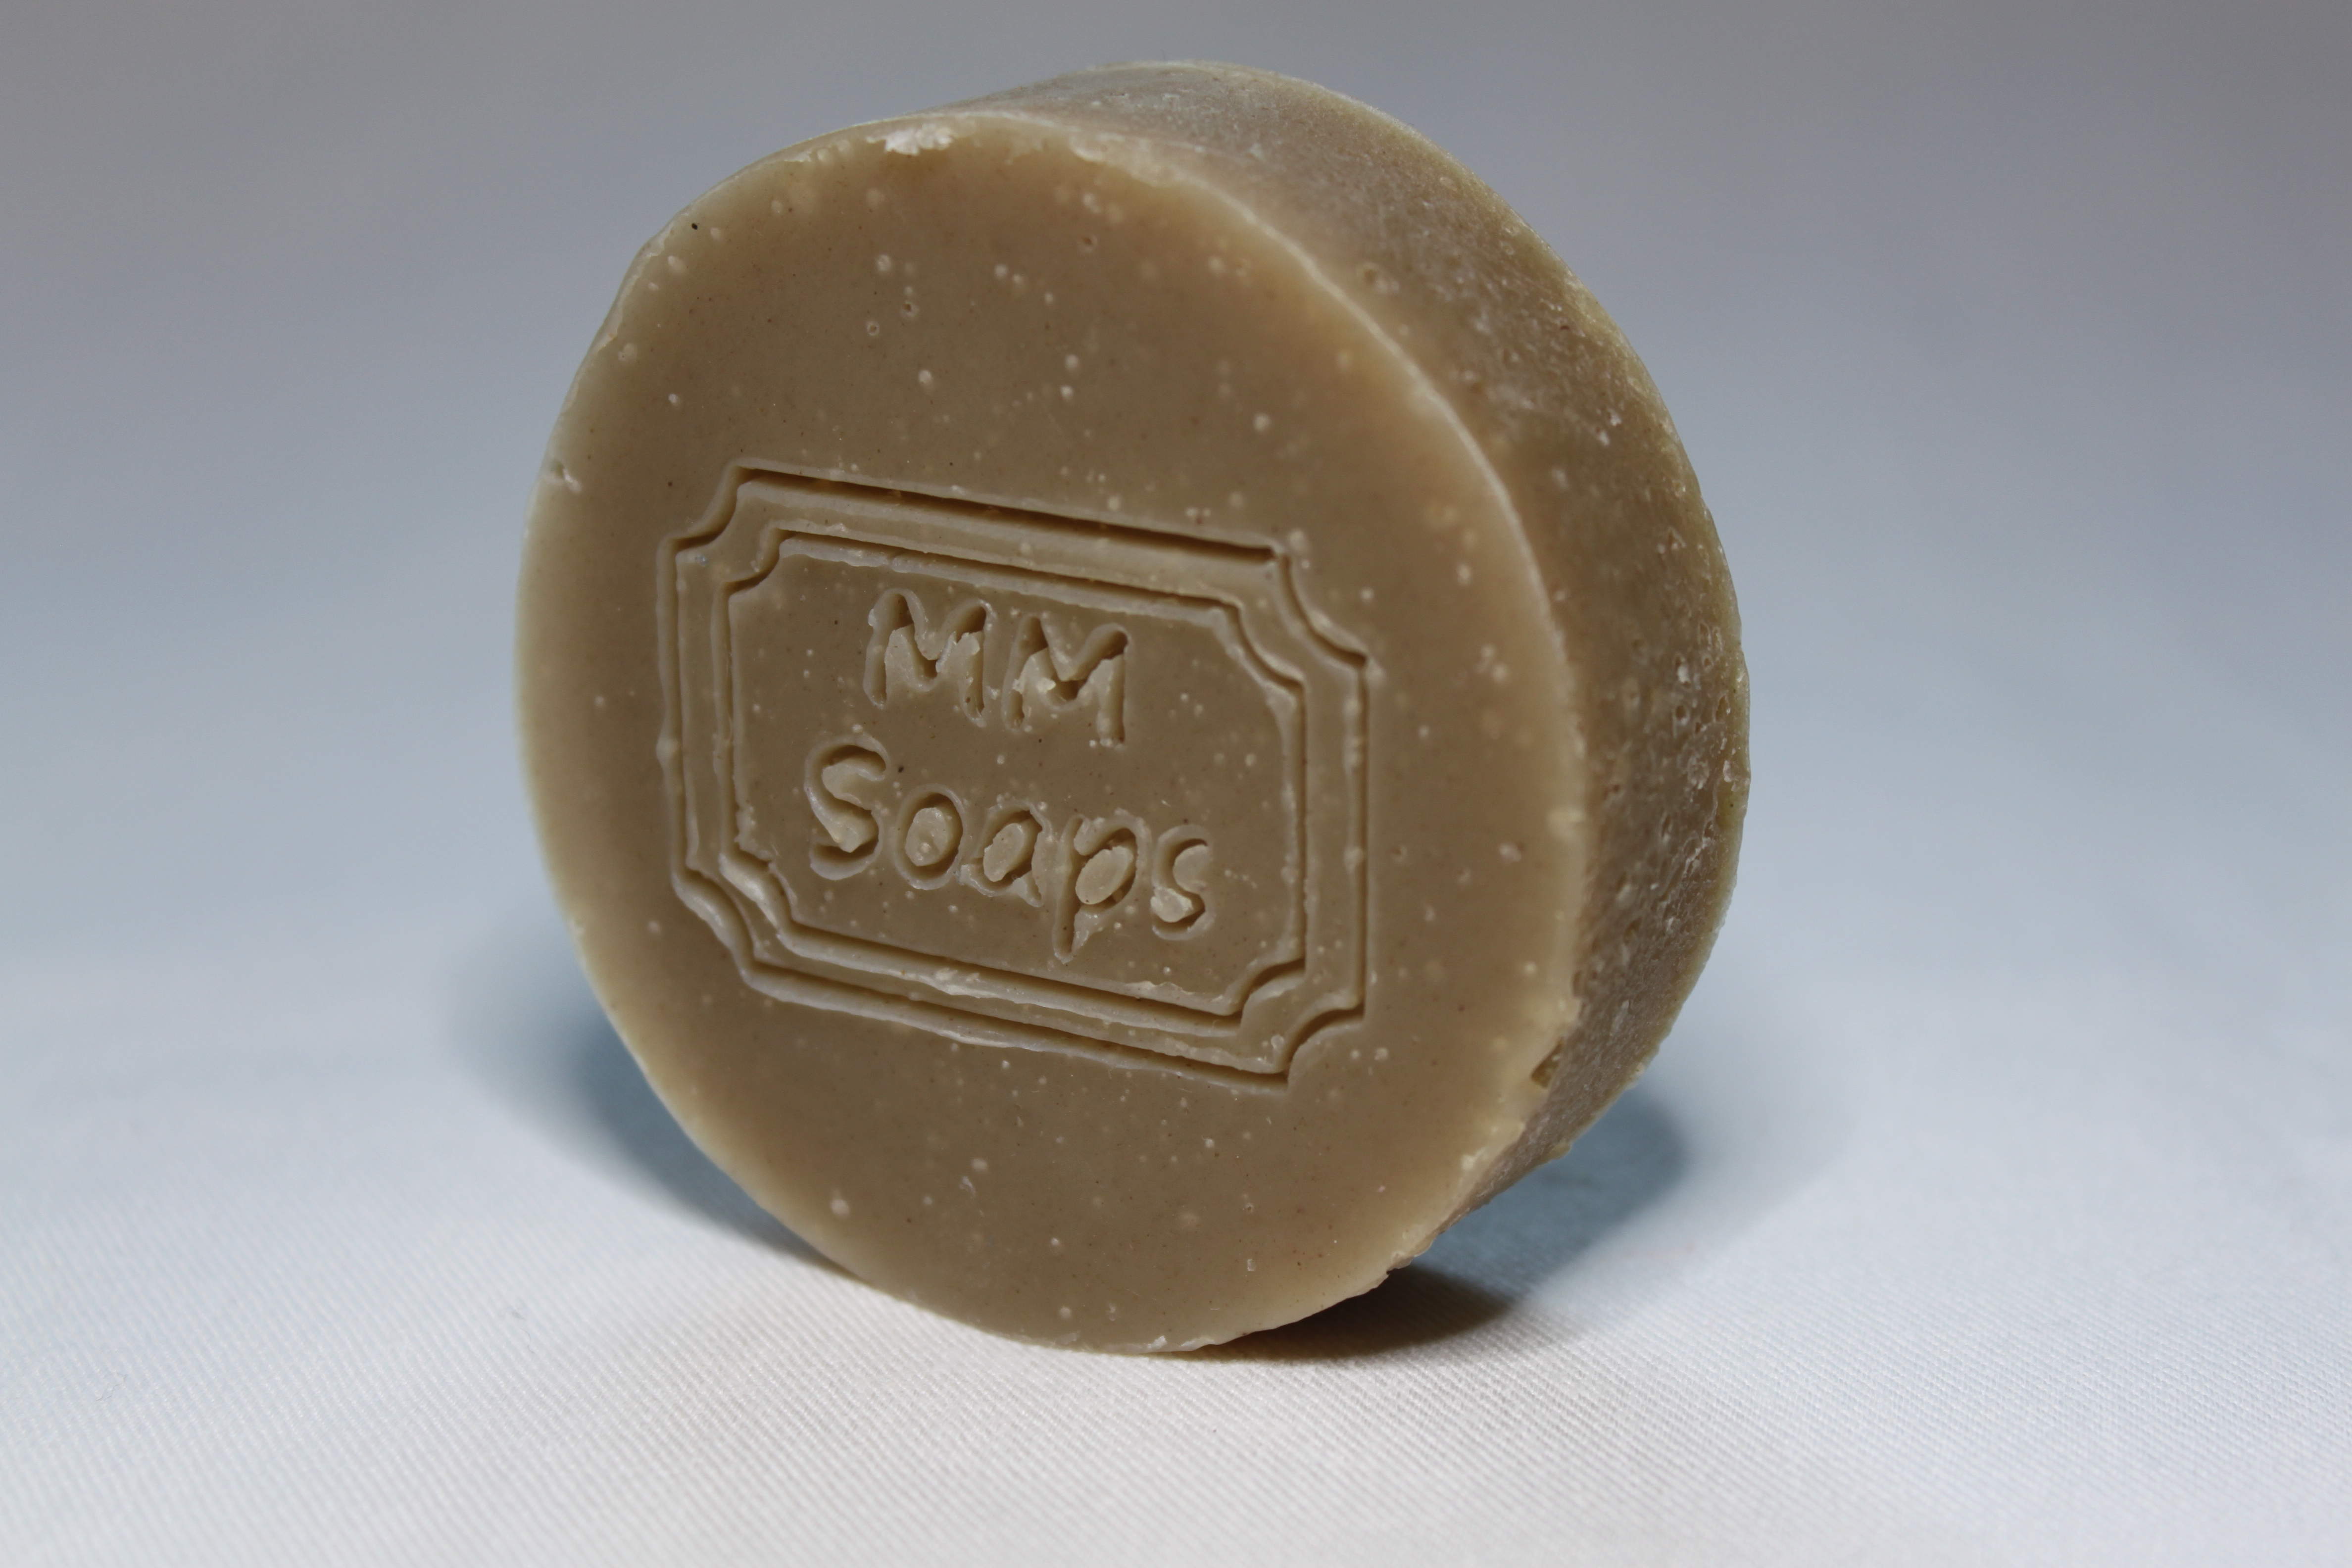 Lemongrass, Lime and Moroccan Clay Soap.